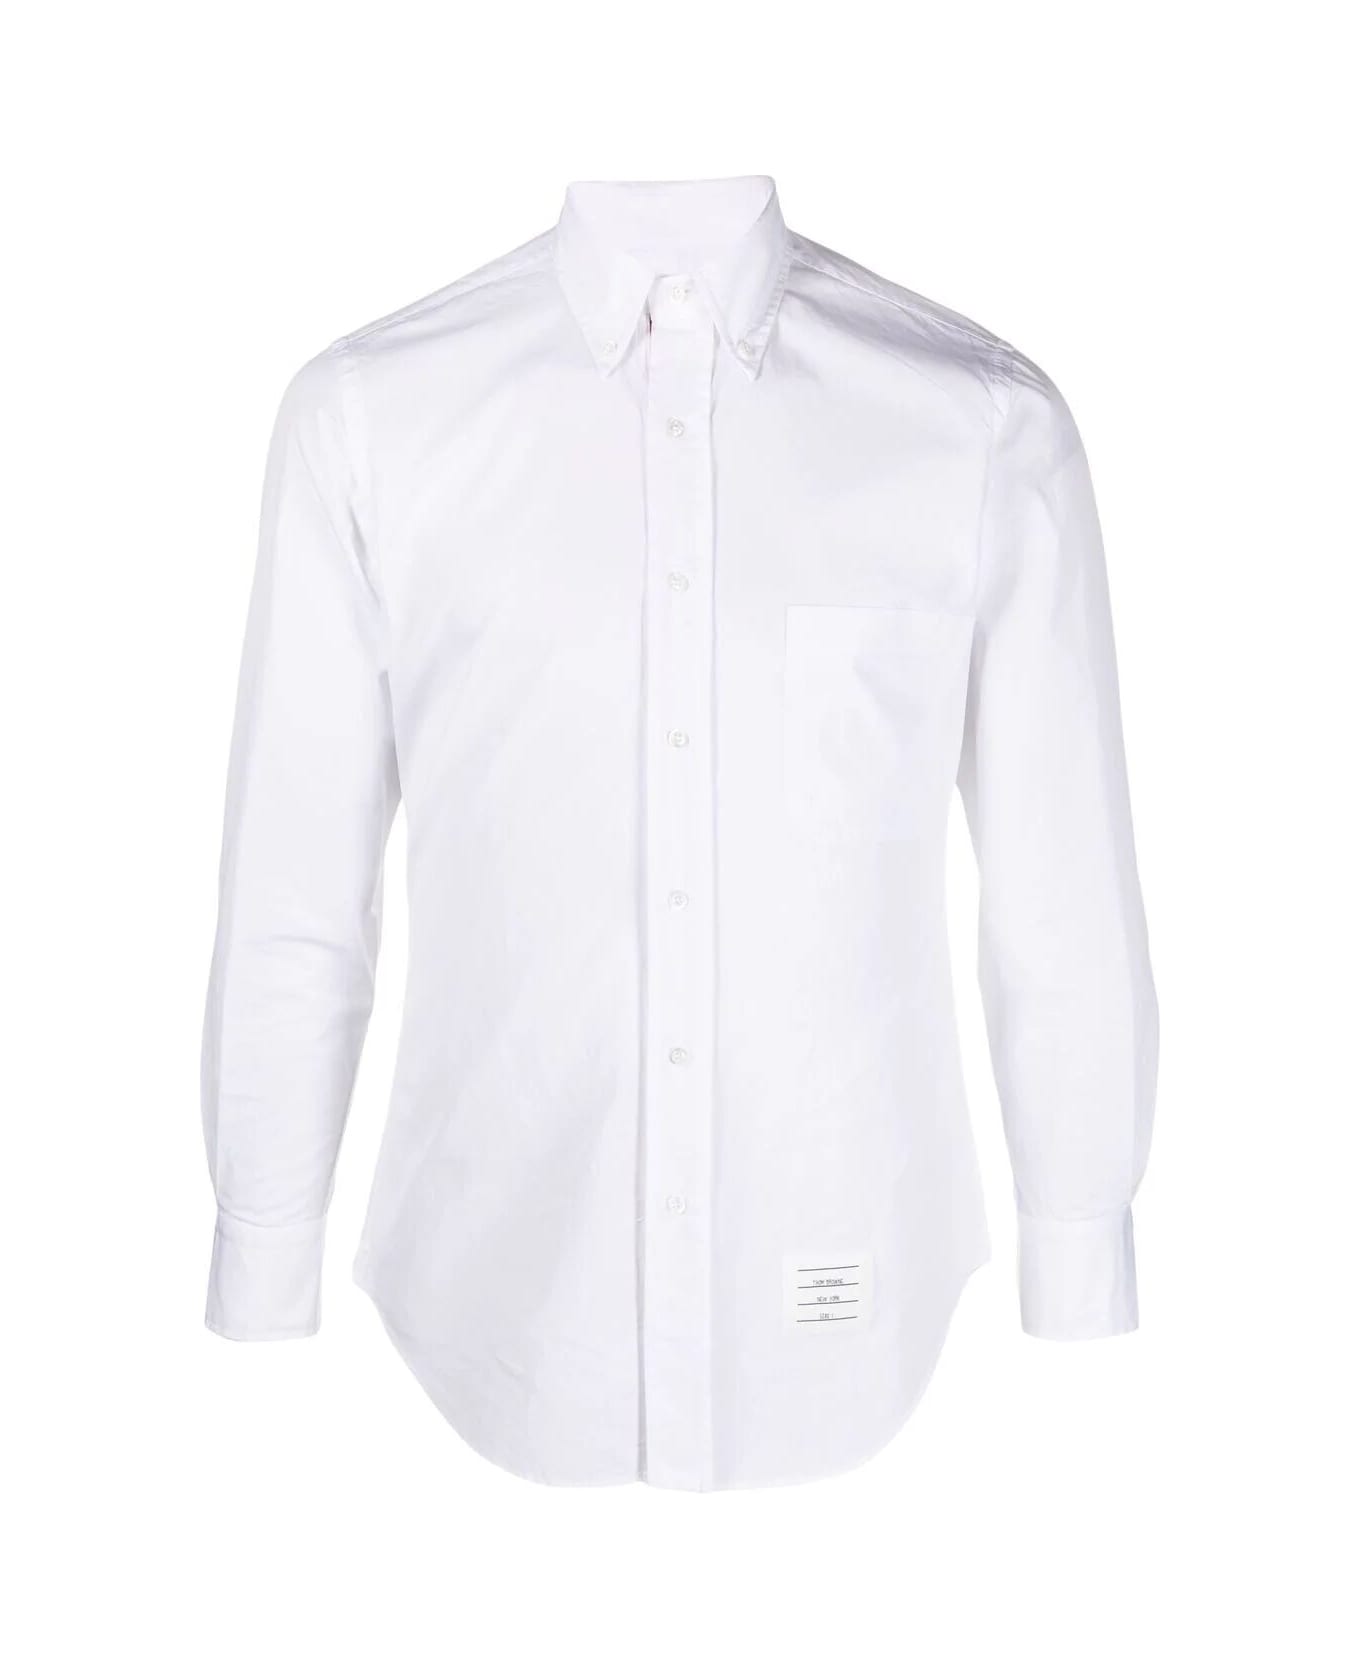 Thom Browne Classic Long Sleeves Shirt With Cf Gg Placket In Solid Poplin - White シャツ